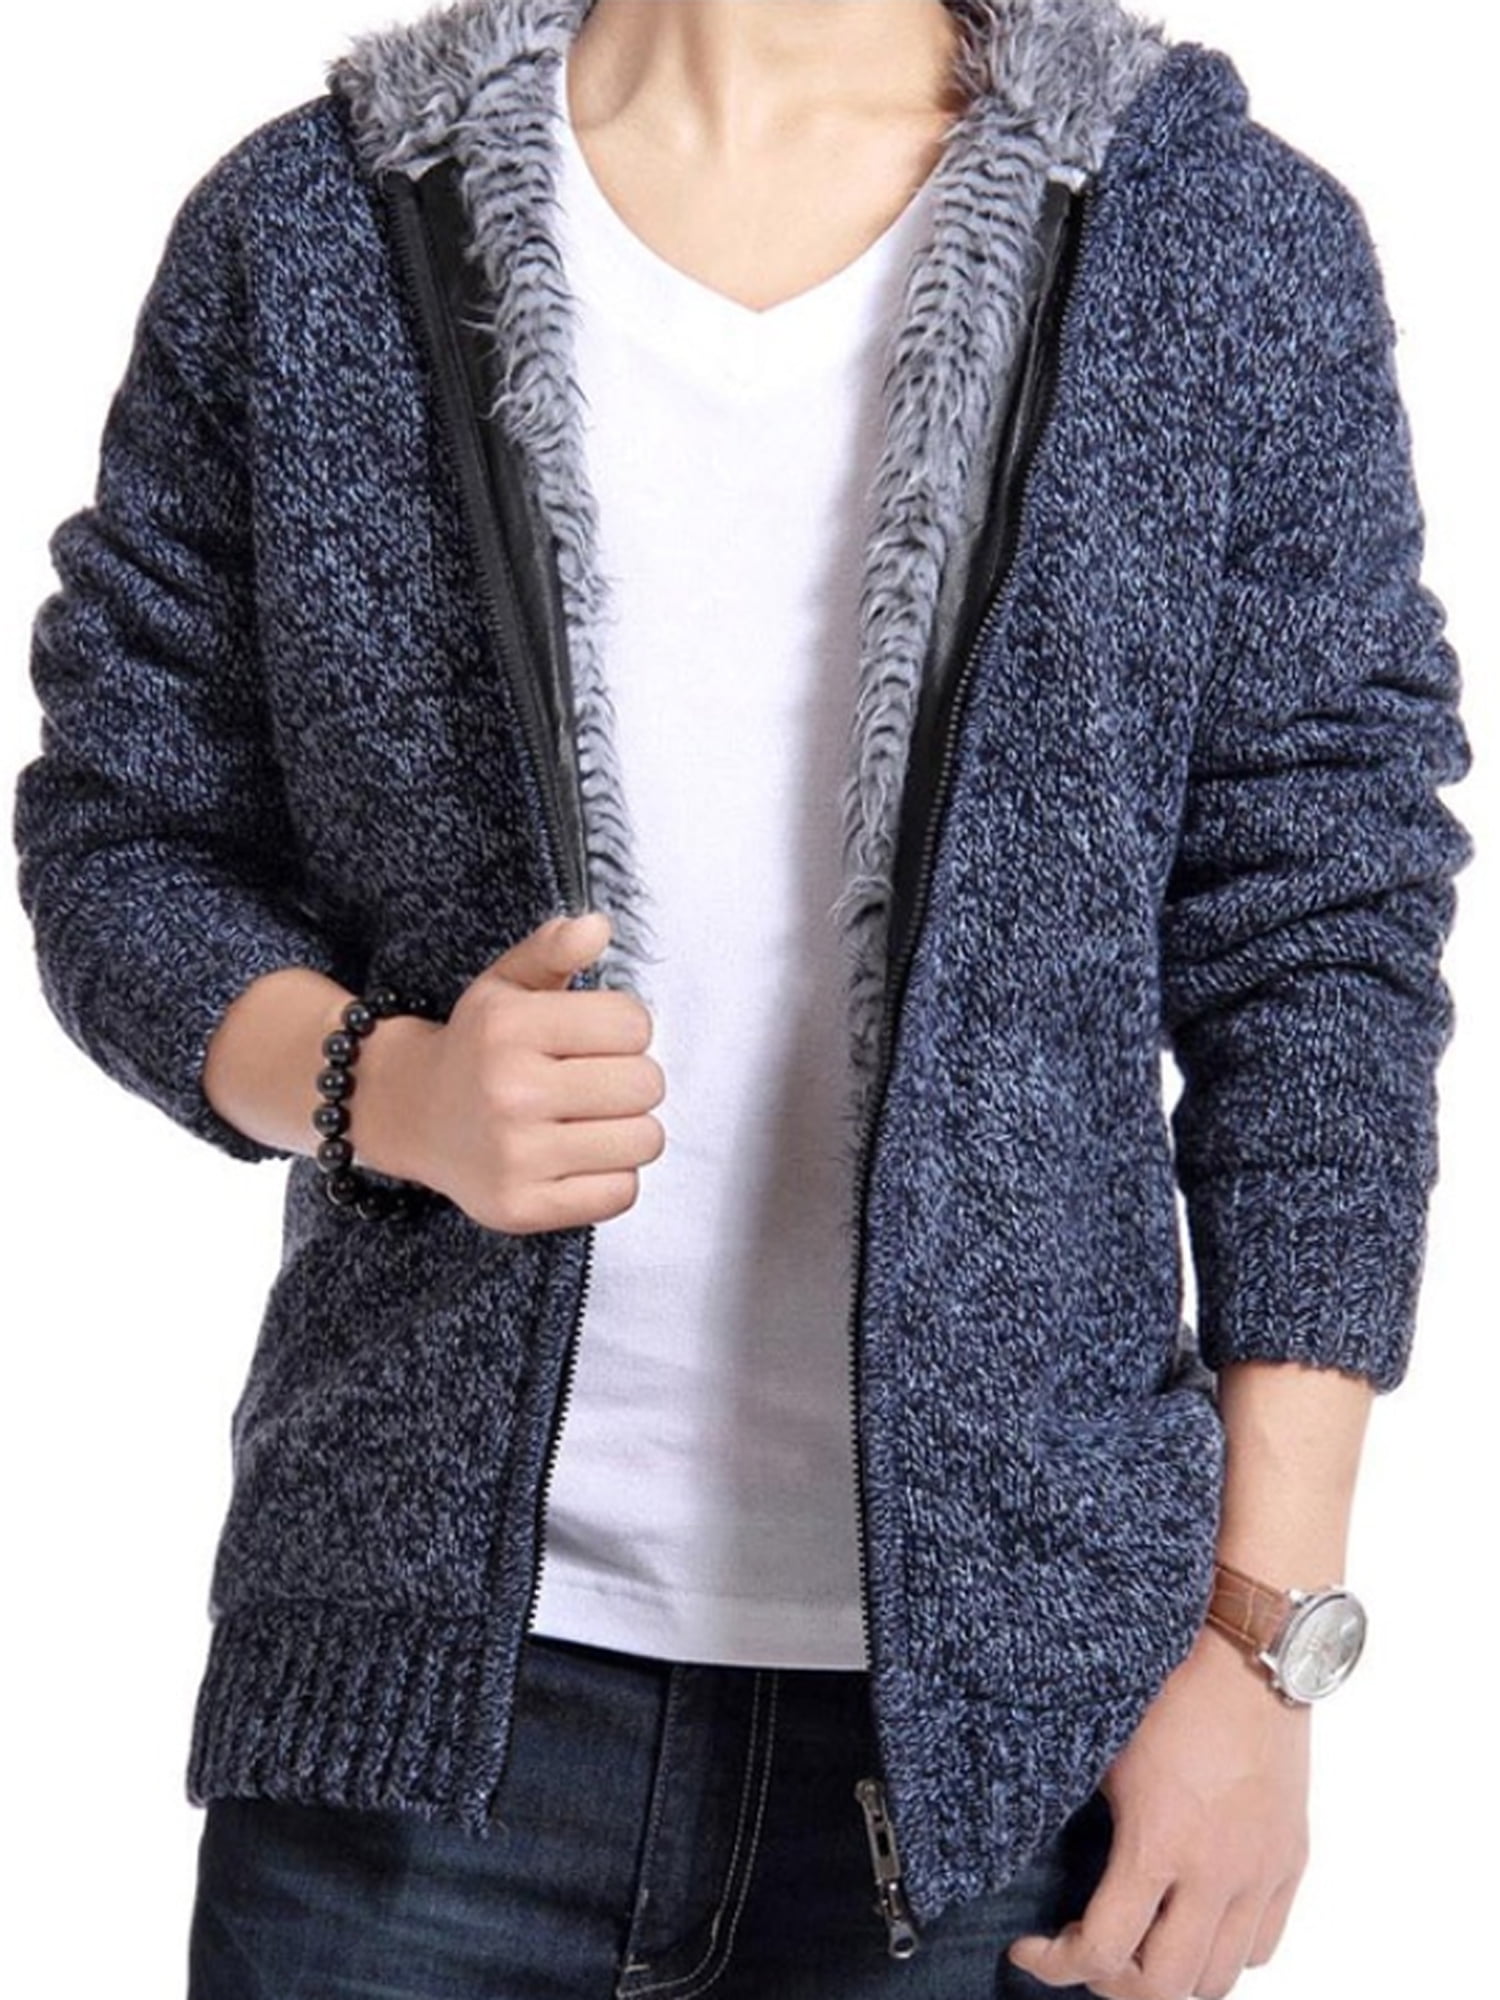 Achinel Mens Knitted Cardigan Thick Sweater Fleece Lining Jumper Hooded Zip Up Warm Winter Knitwear Coat